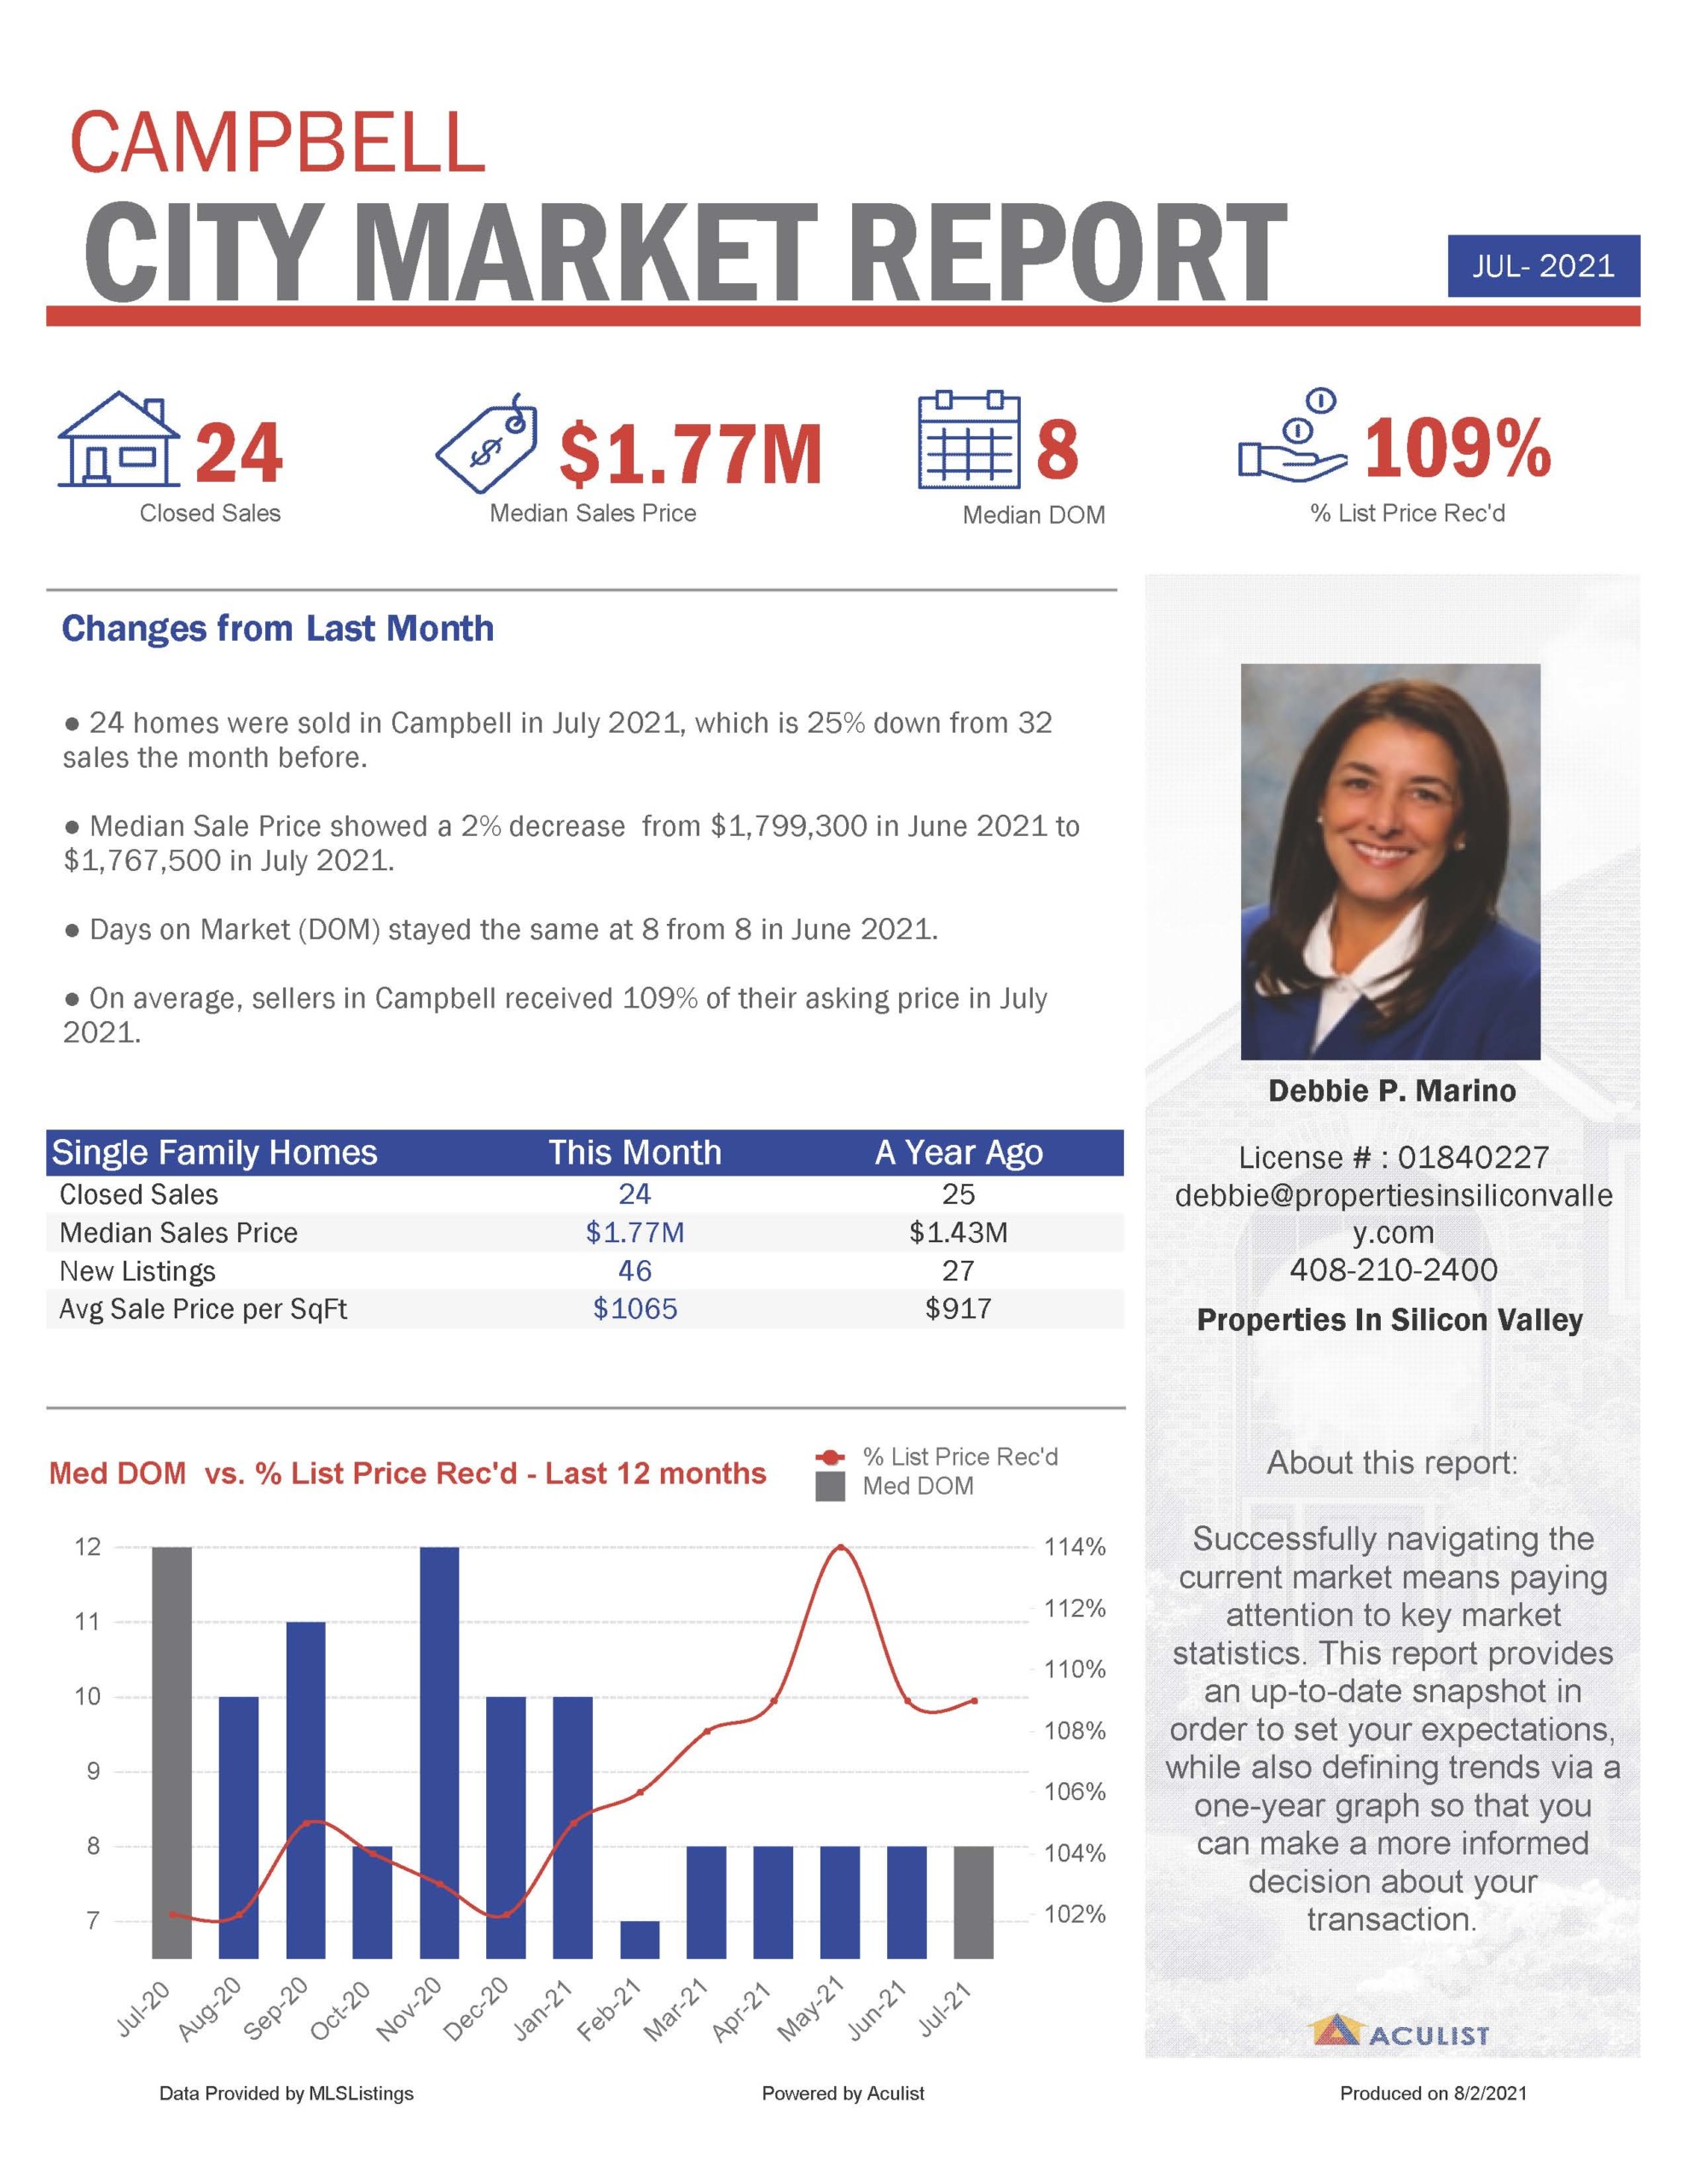 City of Campbell Market Report for July 2021